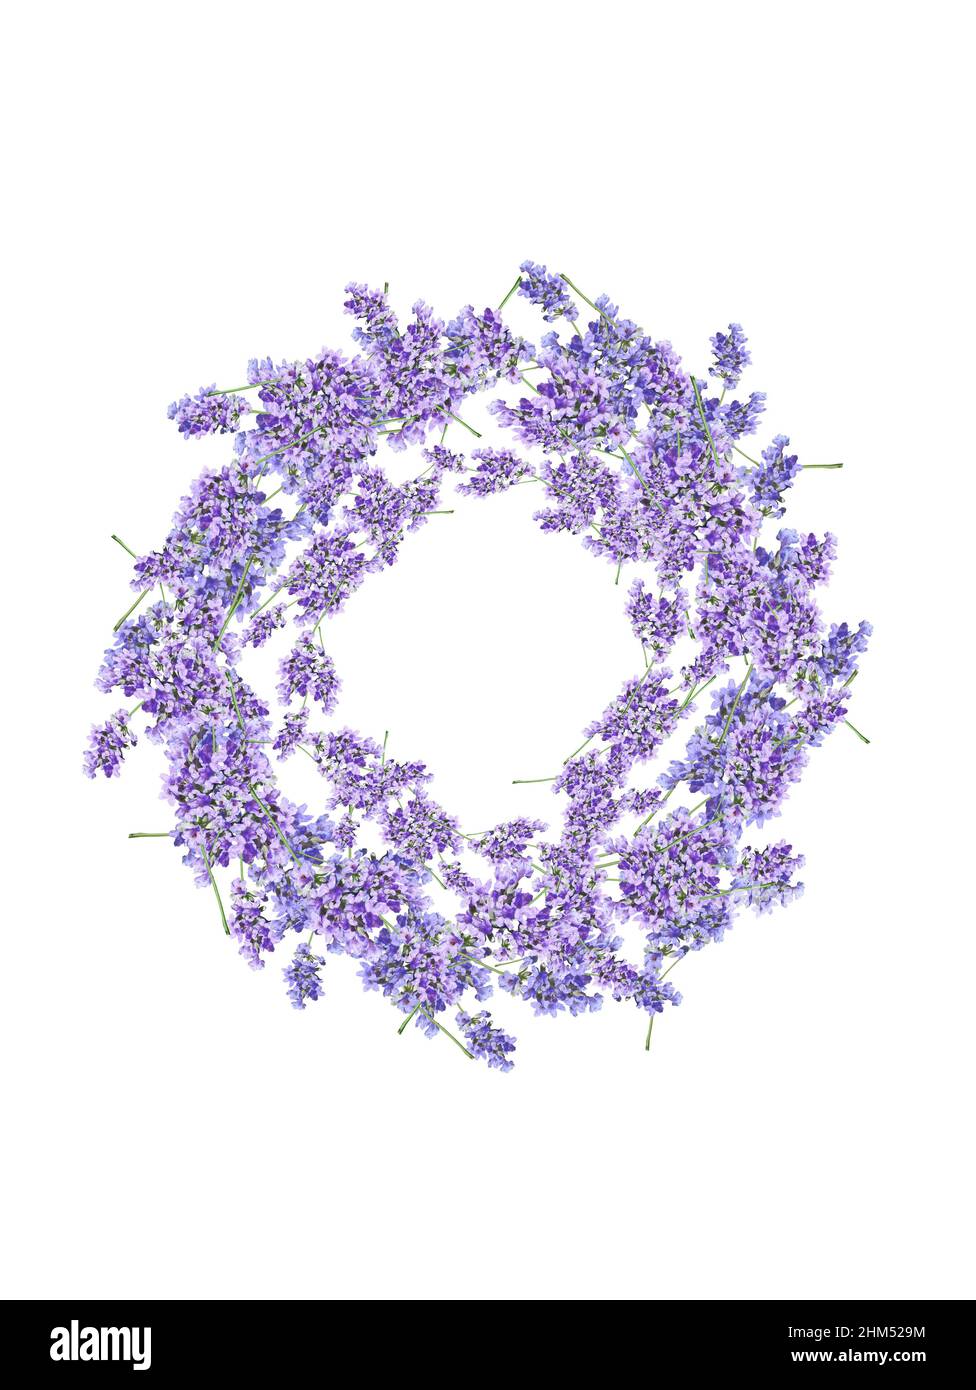 Fresh lavender flowers decoration isolated on white background. Autumn wreath in purple tones. Stock Photo